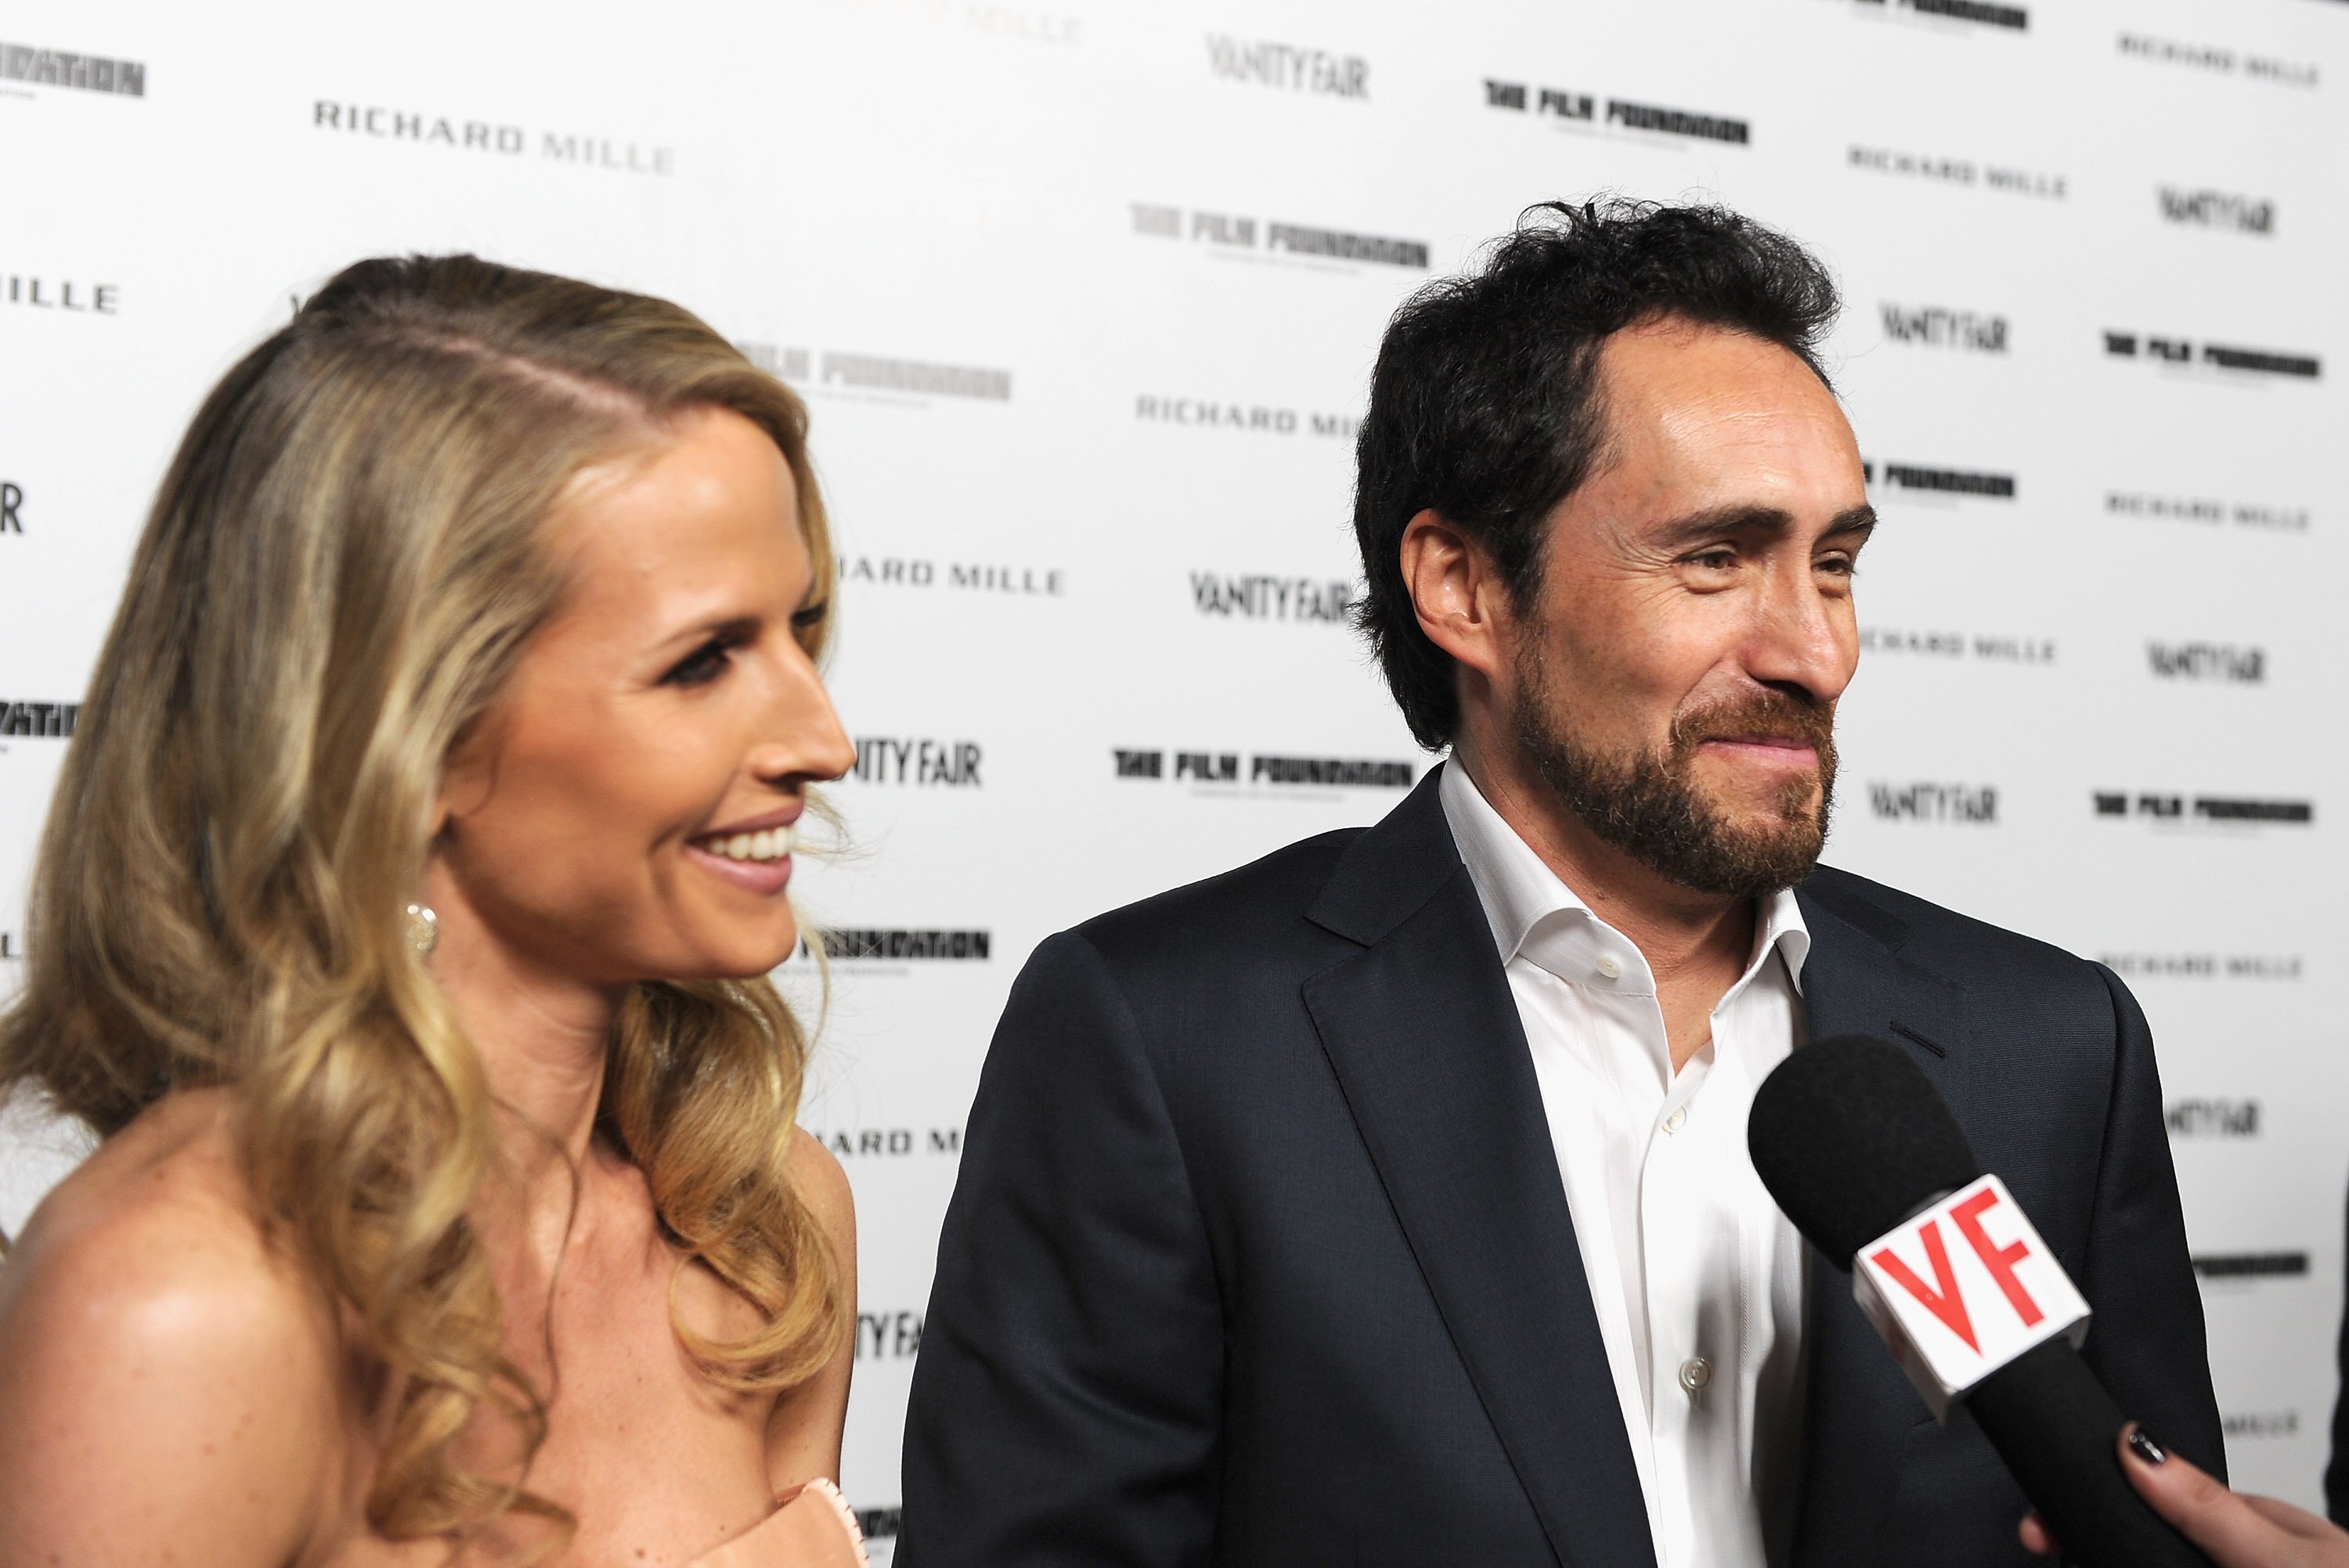 Stefanie Sherk and actor Demian Bichir attend the Vanity Fair and Richard Mille celebration of Martin Scorsese in support of The Film Foundation in 2012. Photo: Getty Images/GlobalImagesUkraine